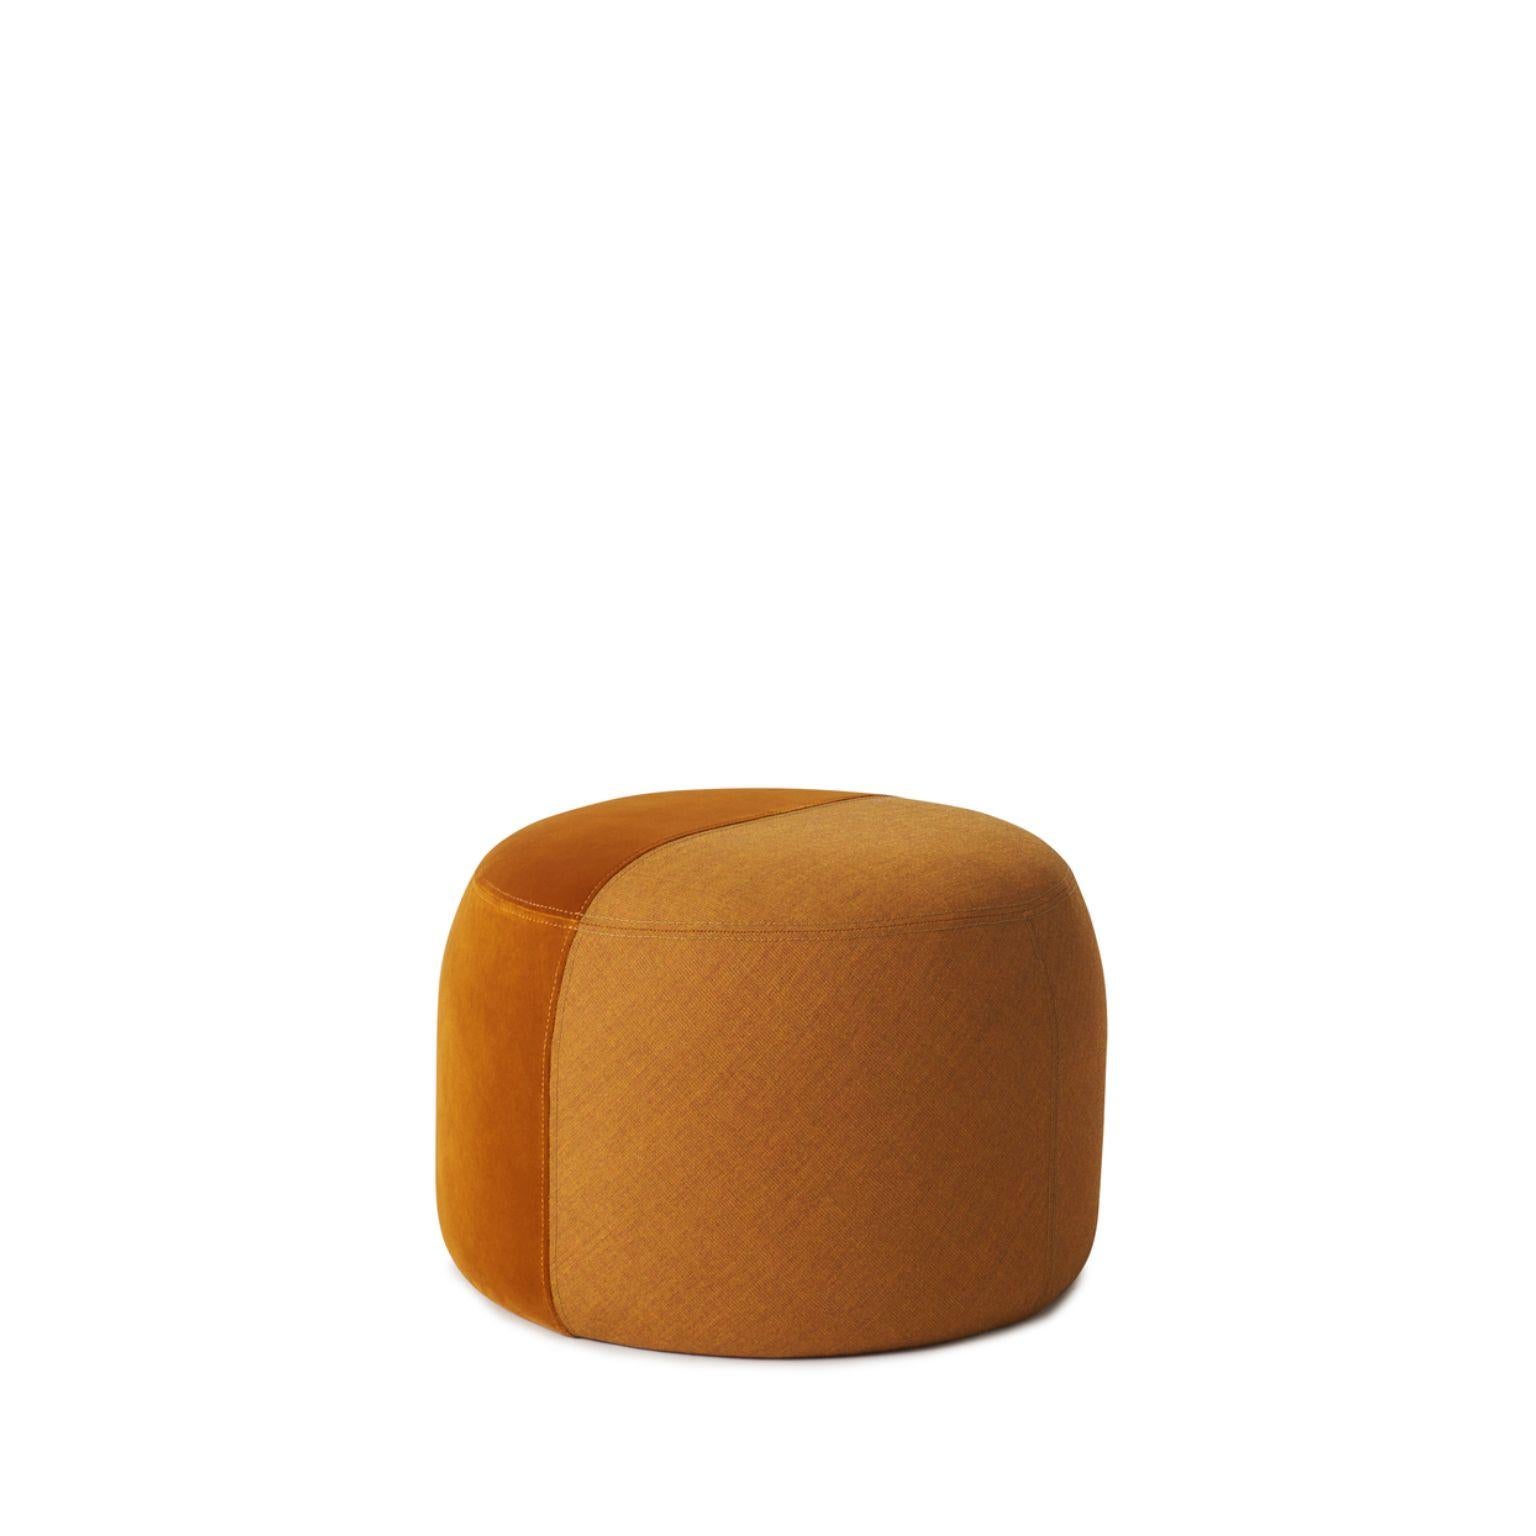 Dainty Pouf dark ochre amber by Warm Nordic
Dimensions: D 55 x H 39 cm
Material: Textile upholstery, Wooden frame, foam.
Weight: 9.5 kg
Also available in different colours and finishes.

Sophisticated, two-coloured pouf with soft shapes and a clean